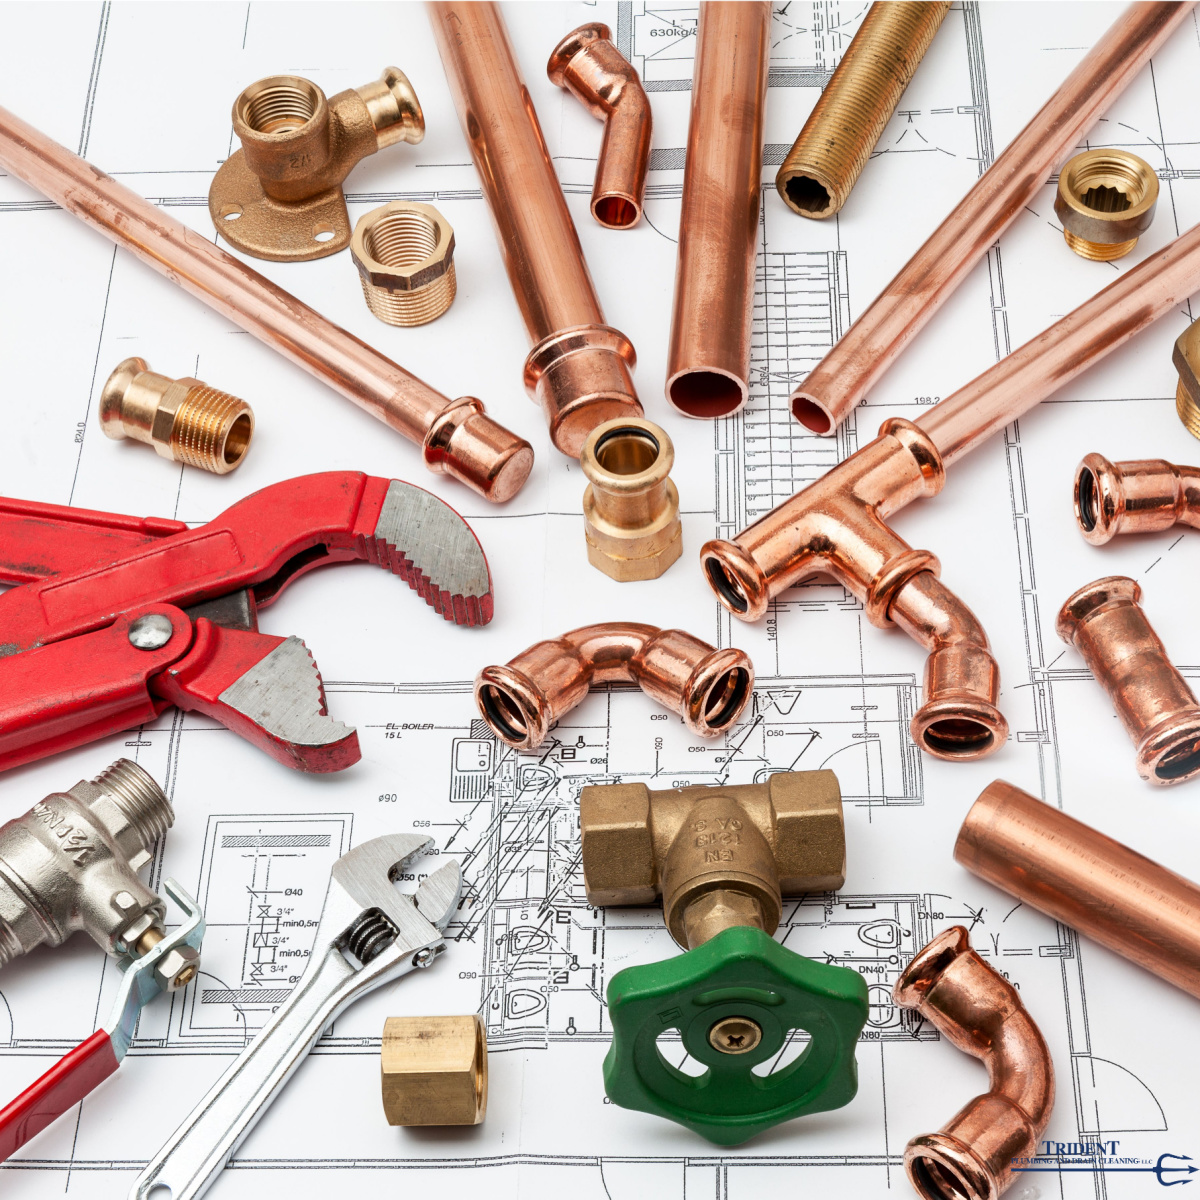 Why And When Would Repiping Plumbing Service In Bothell Be Needed?